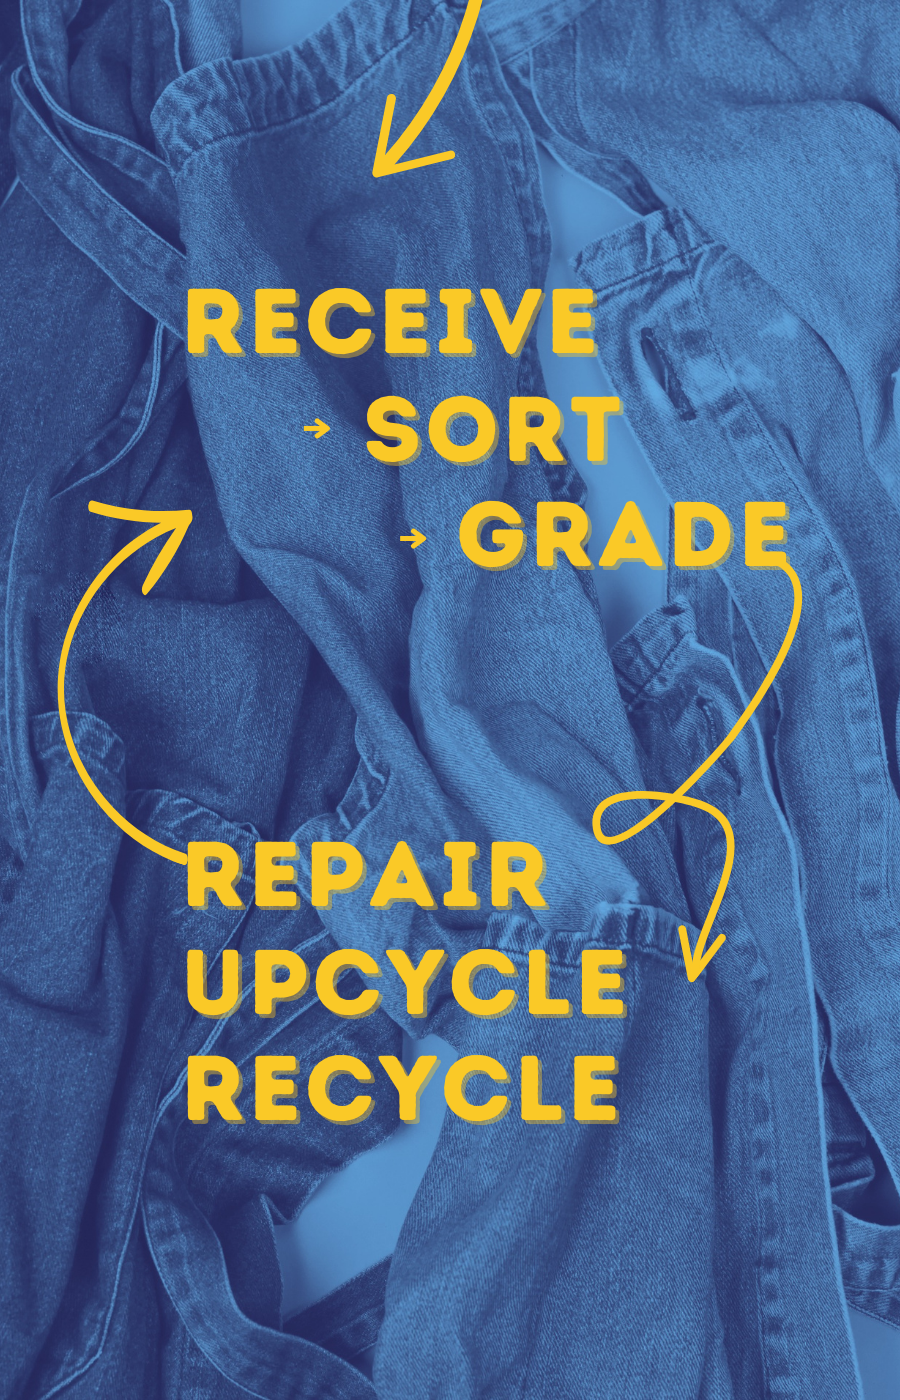 the recycling process, receive, sort, grade, repair, upcycle, recycle, and then repeat the process